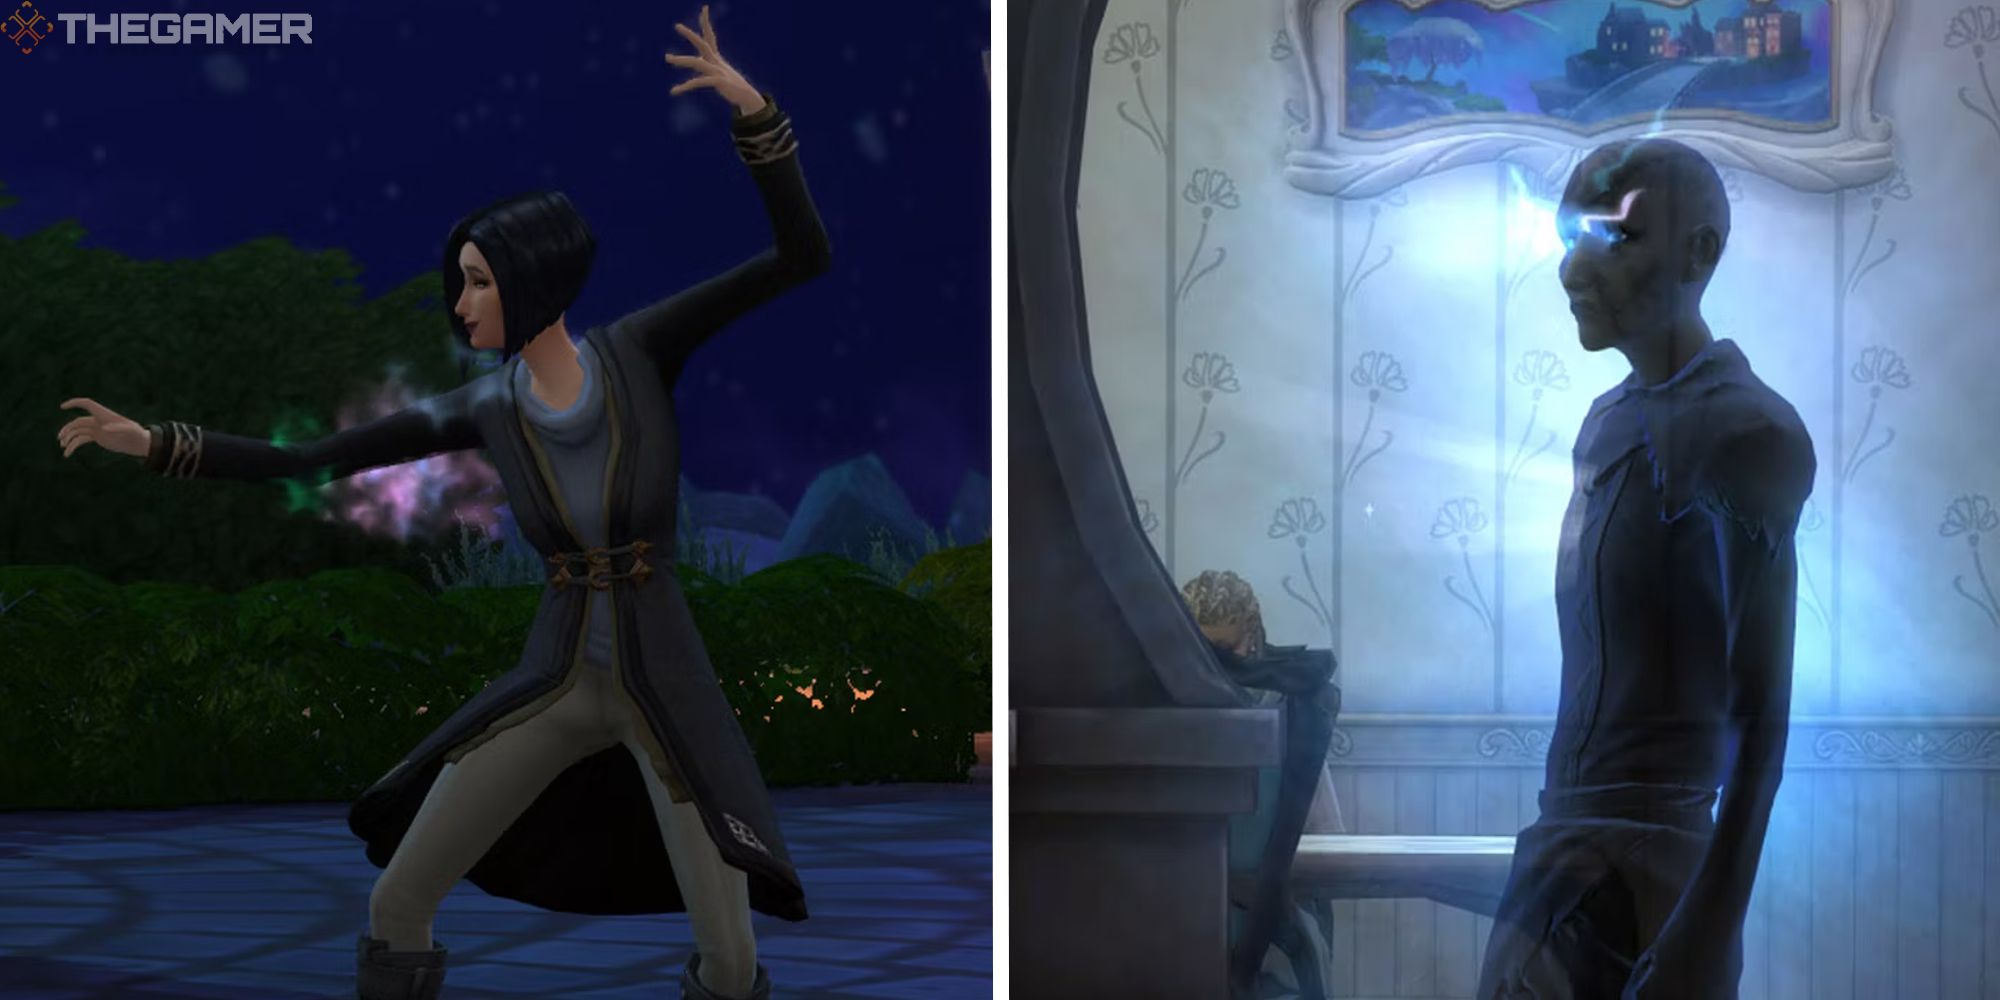 split image showing spellcaster using a spell, next to image of night wraith